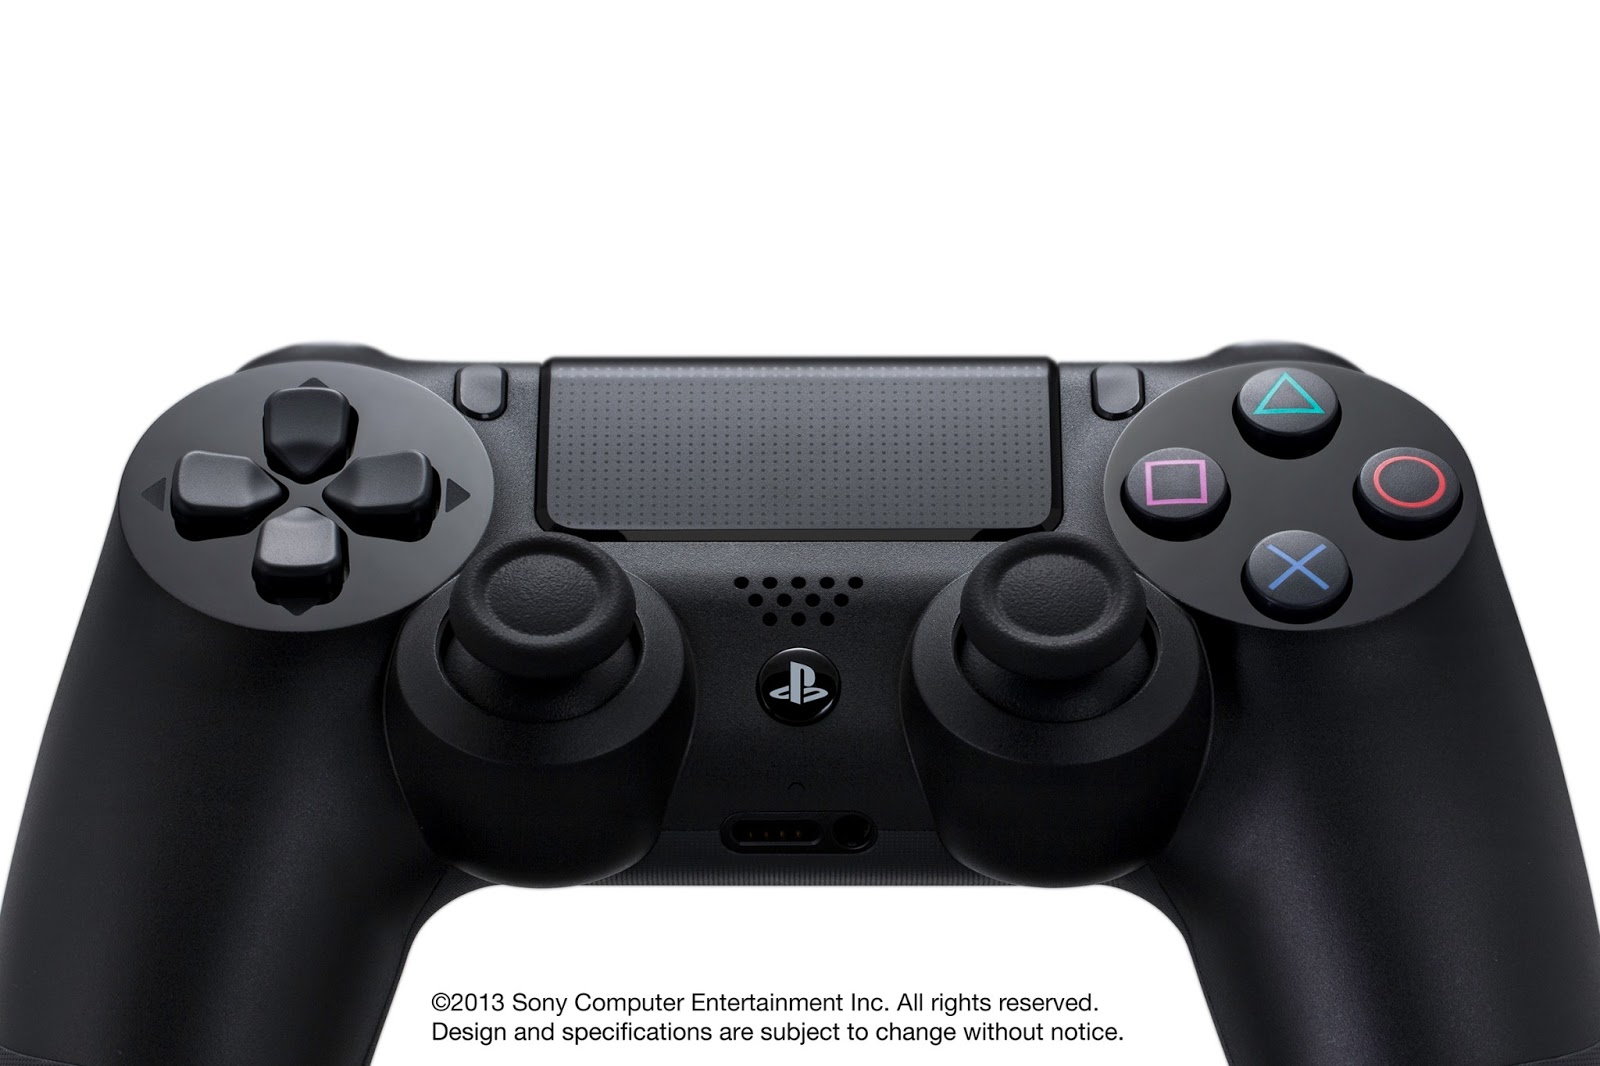 PlayStation 4 Revealed; The Hardware and Controller pic 4